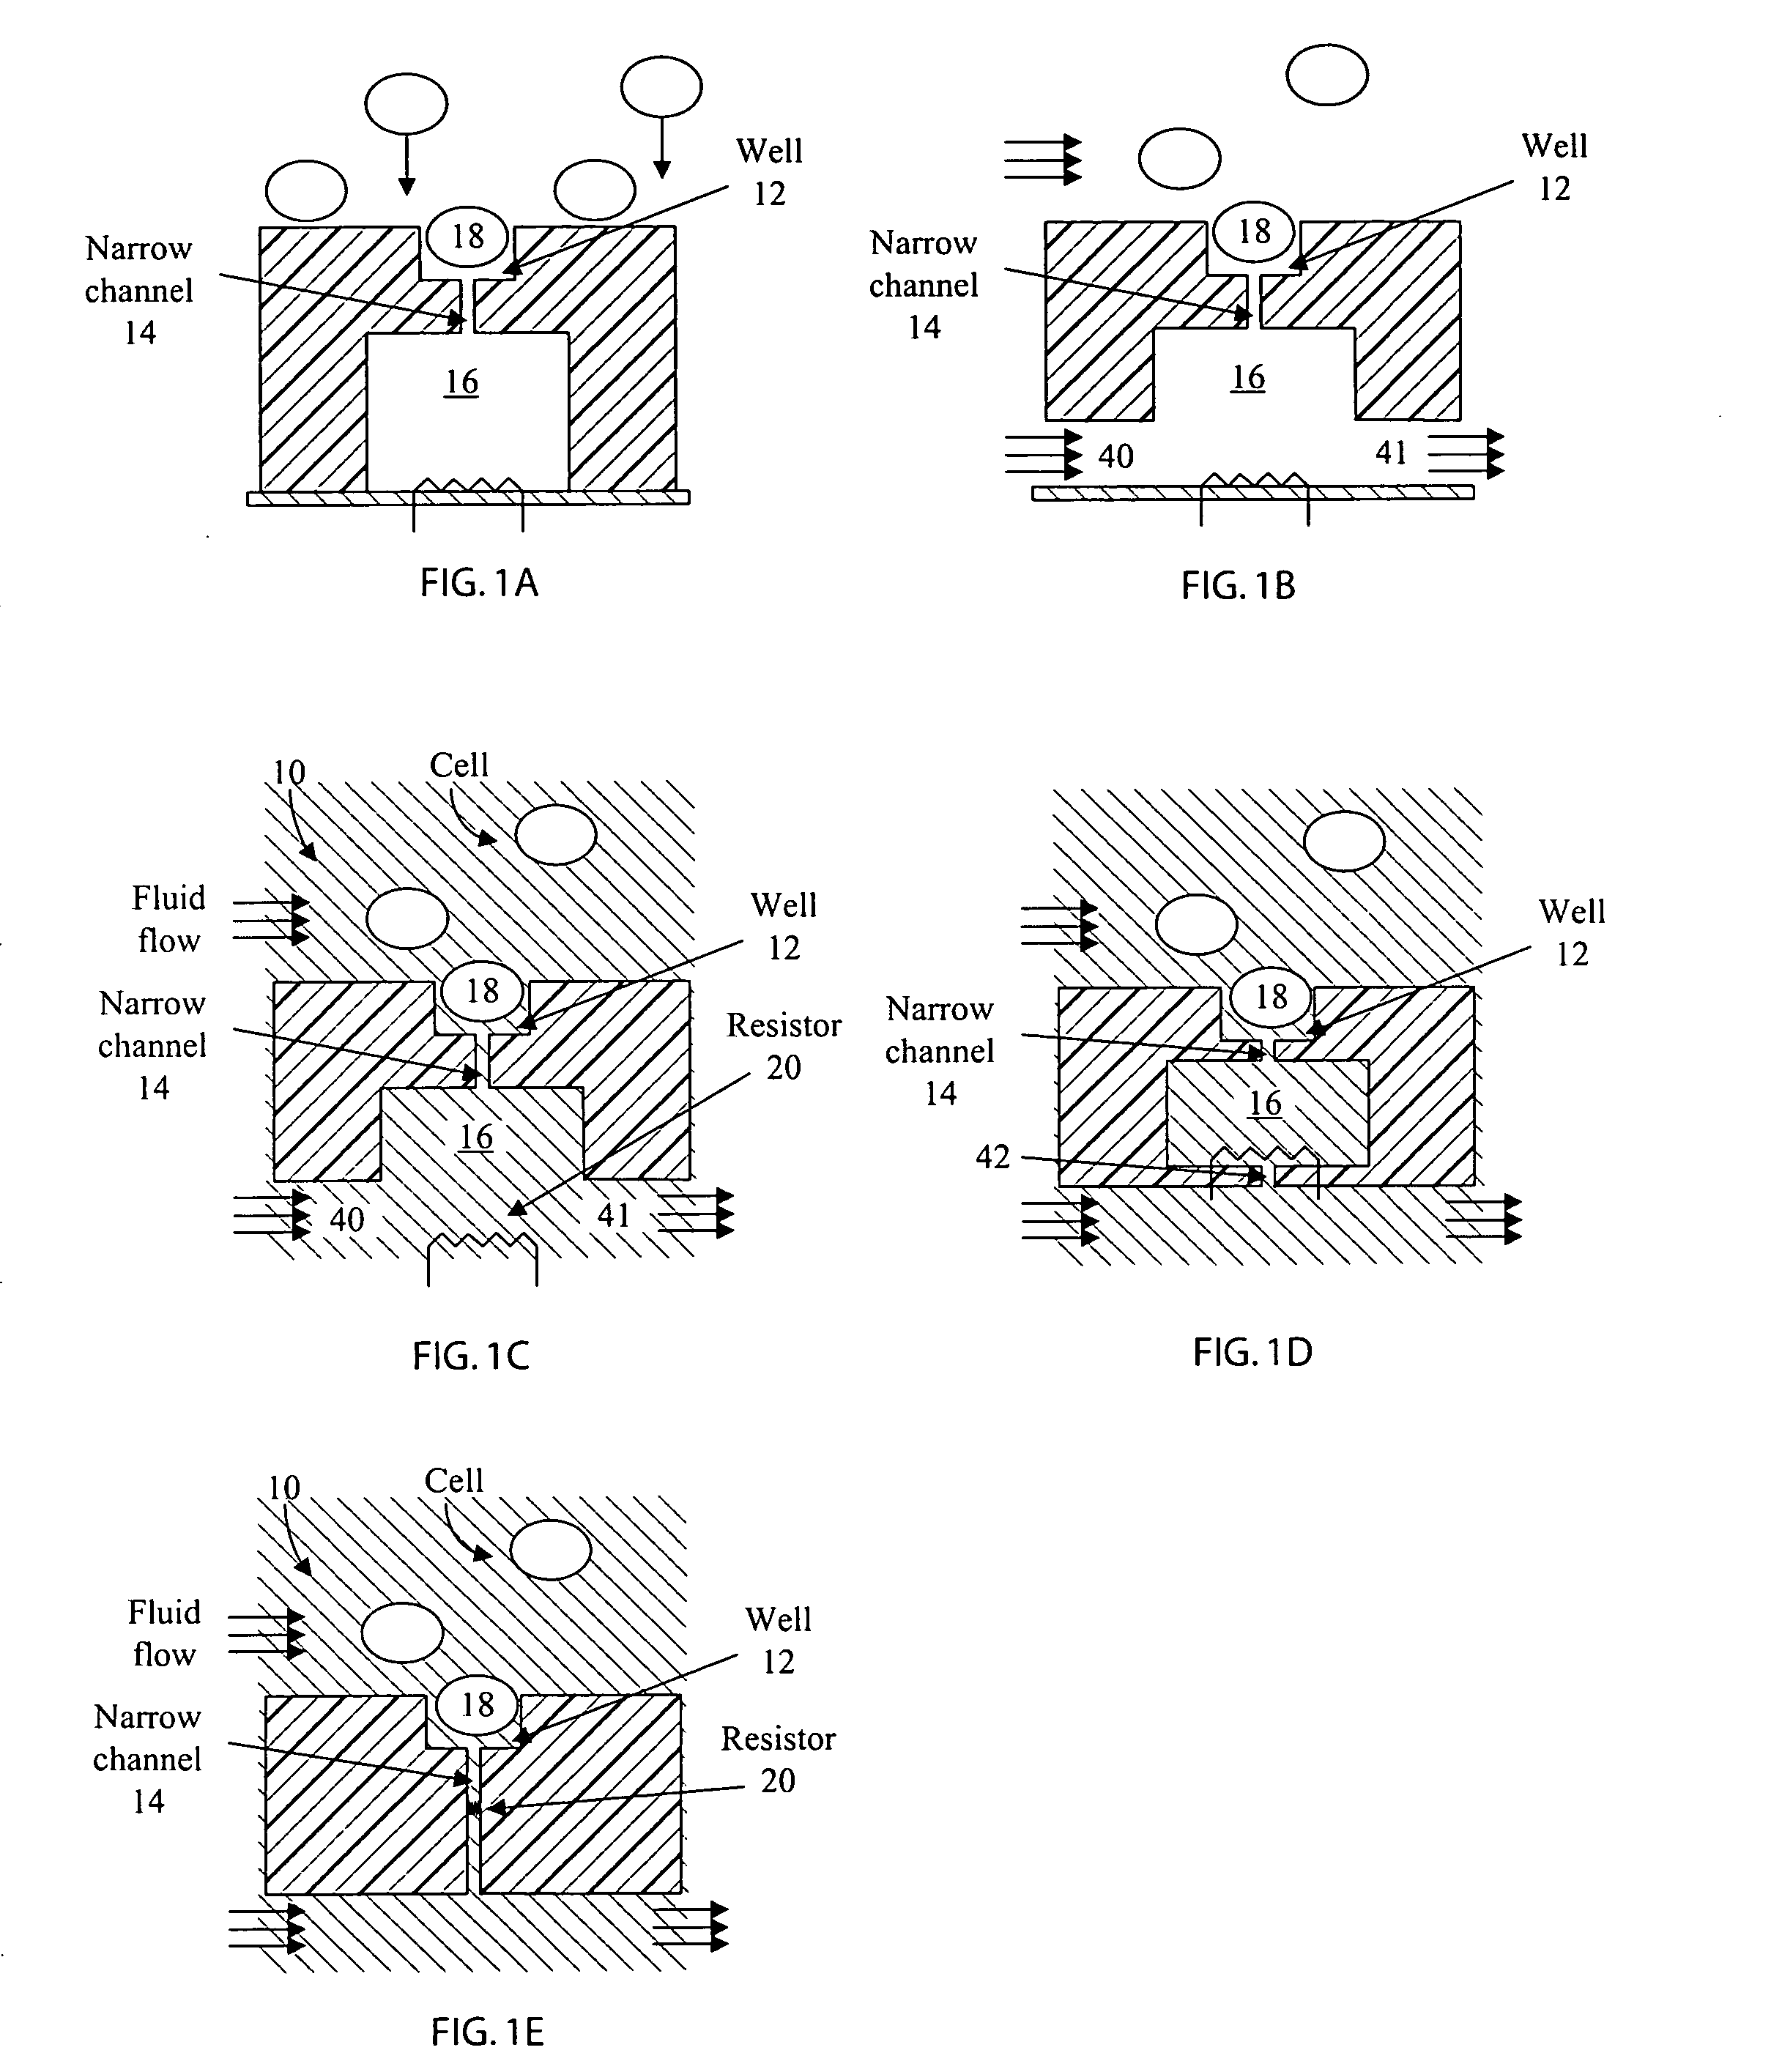 Hydrodynamic capture and release mechanisms for particle manipulation